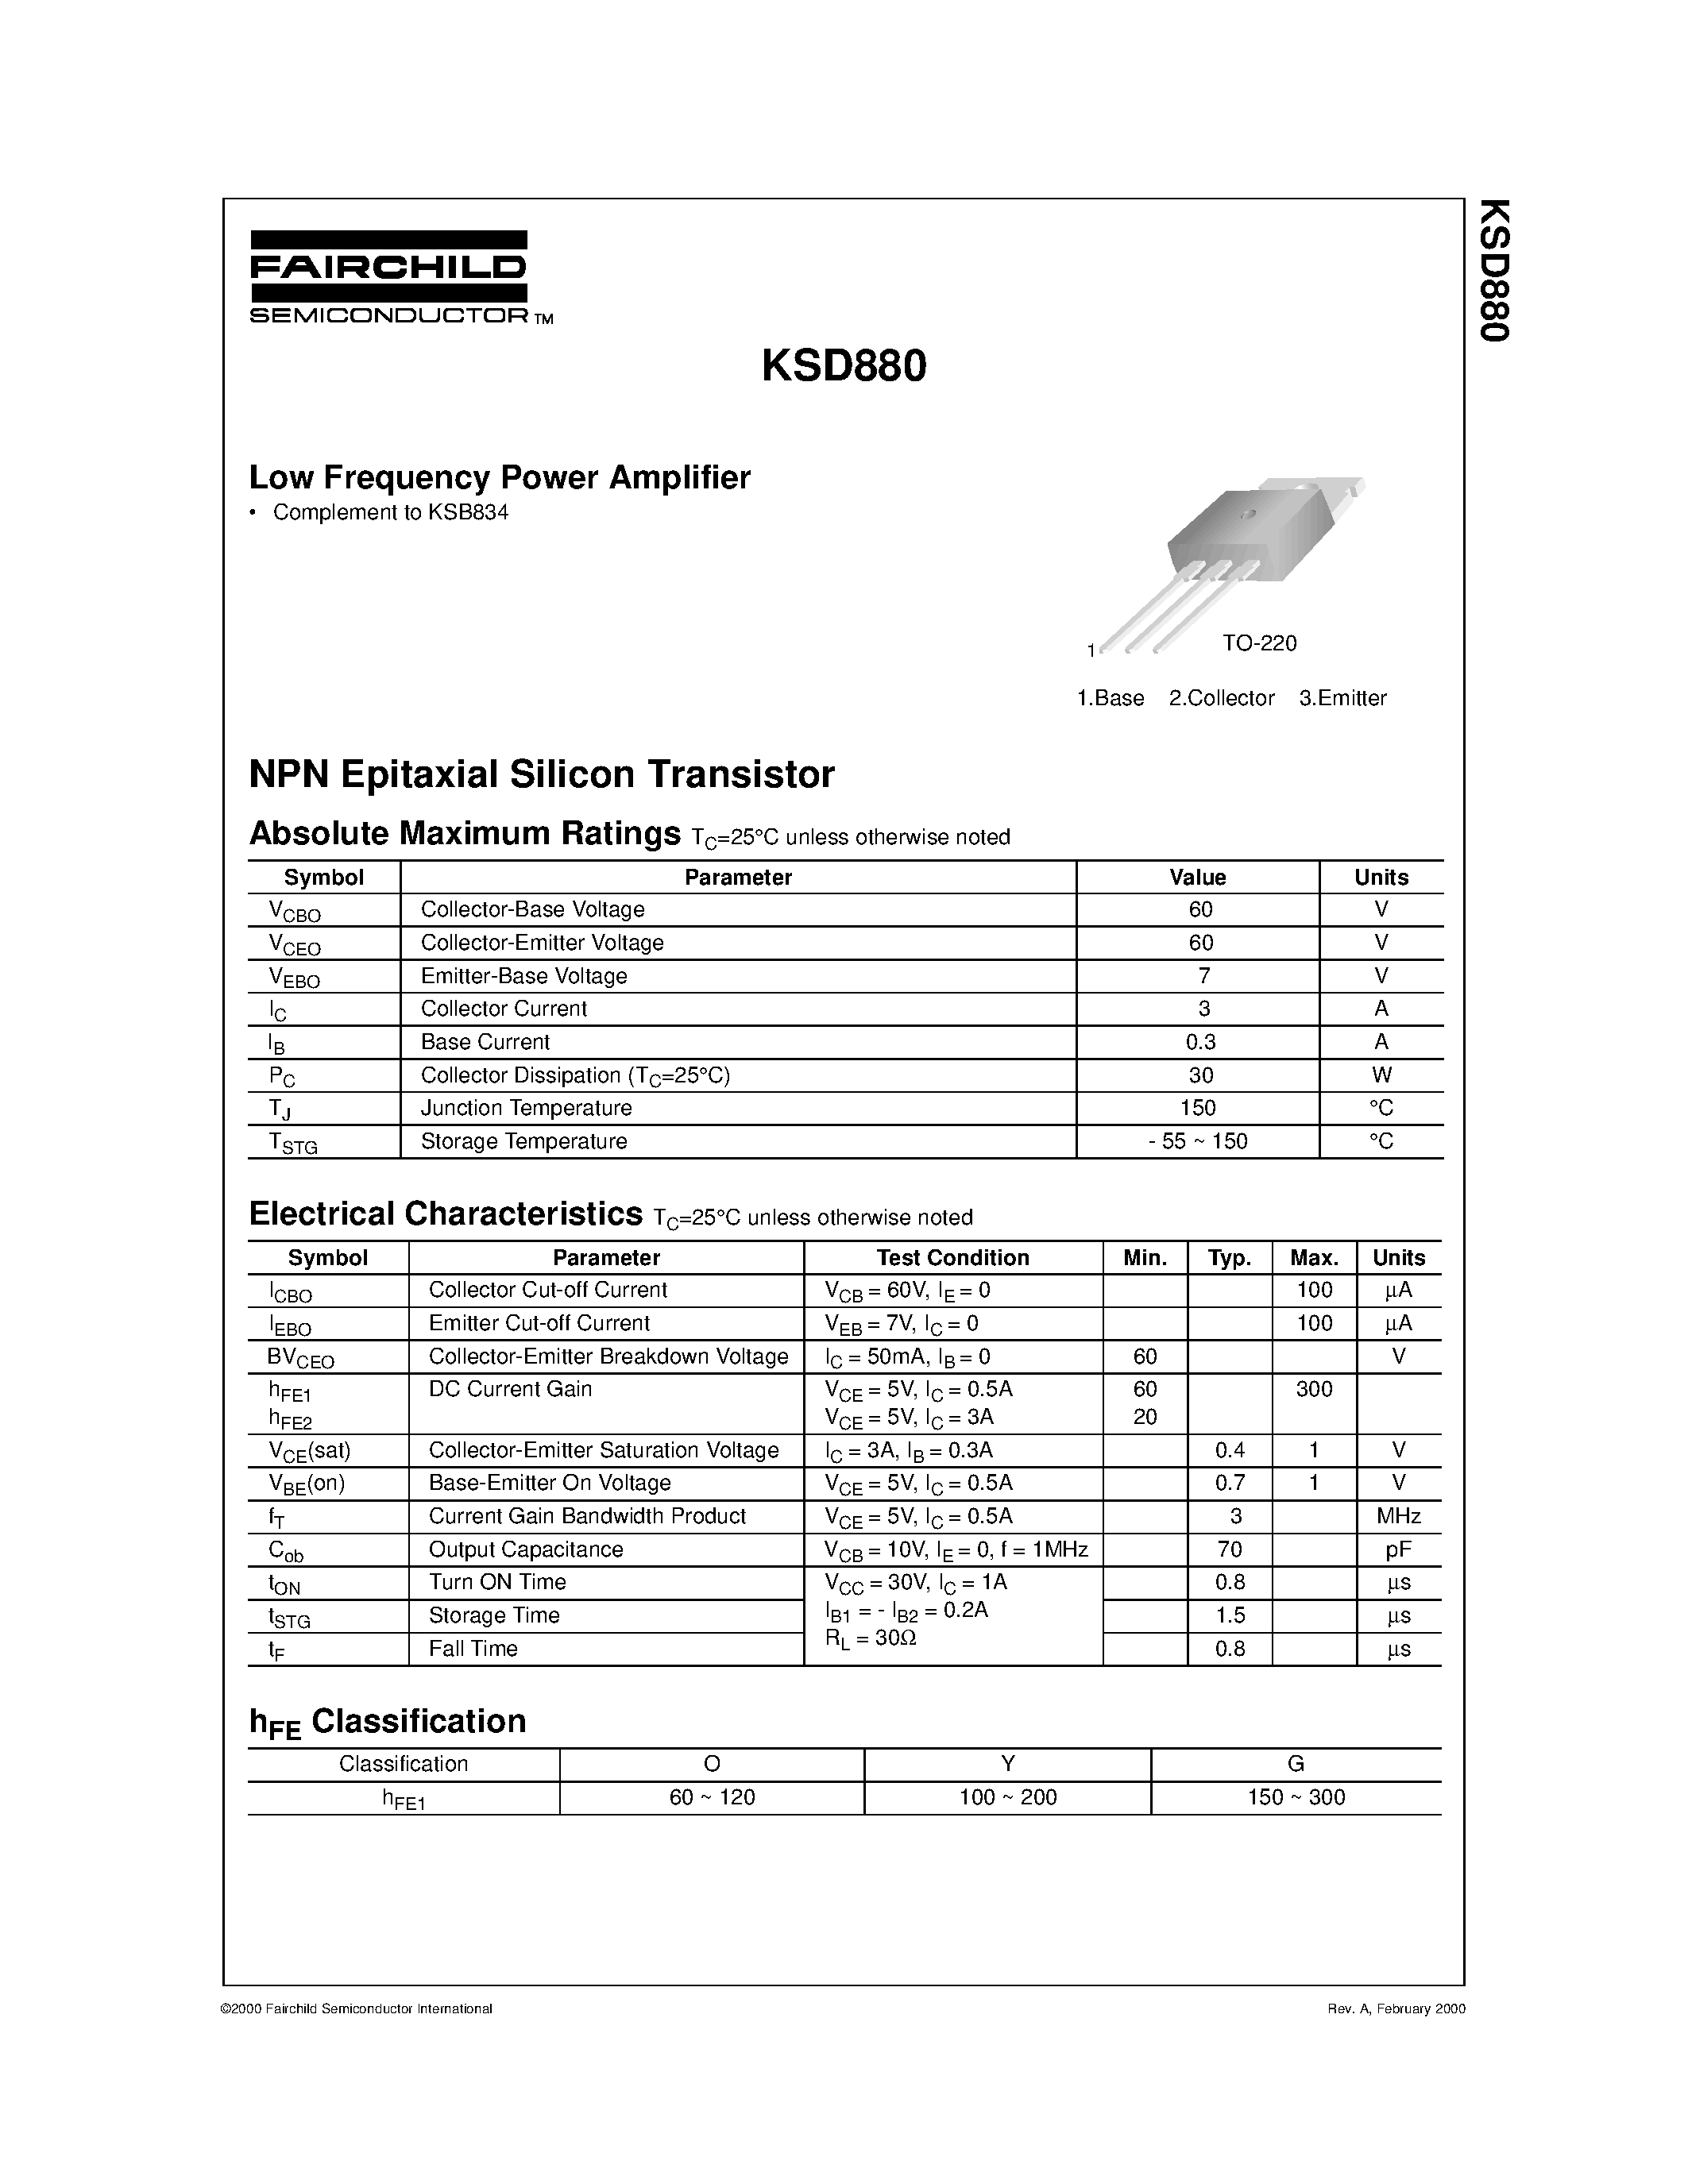 Datasheet KSD880 - Low Frequency Power Amplifier page 1